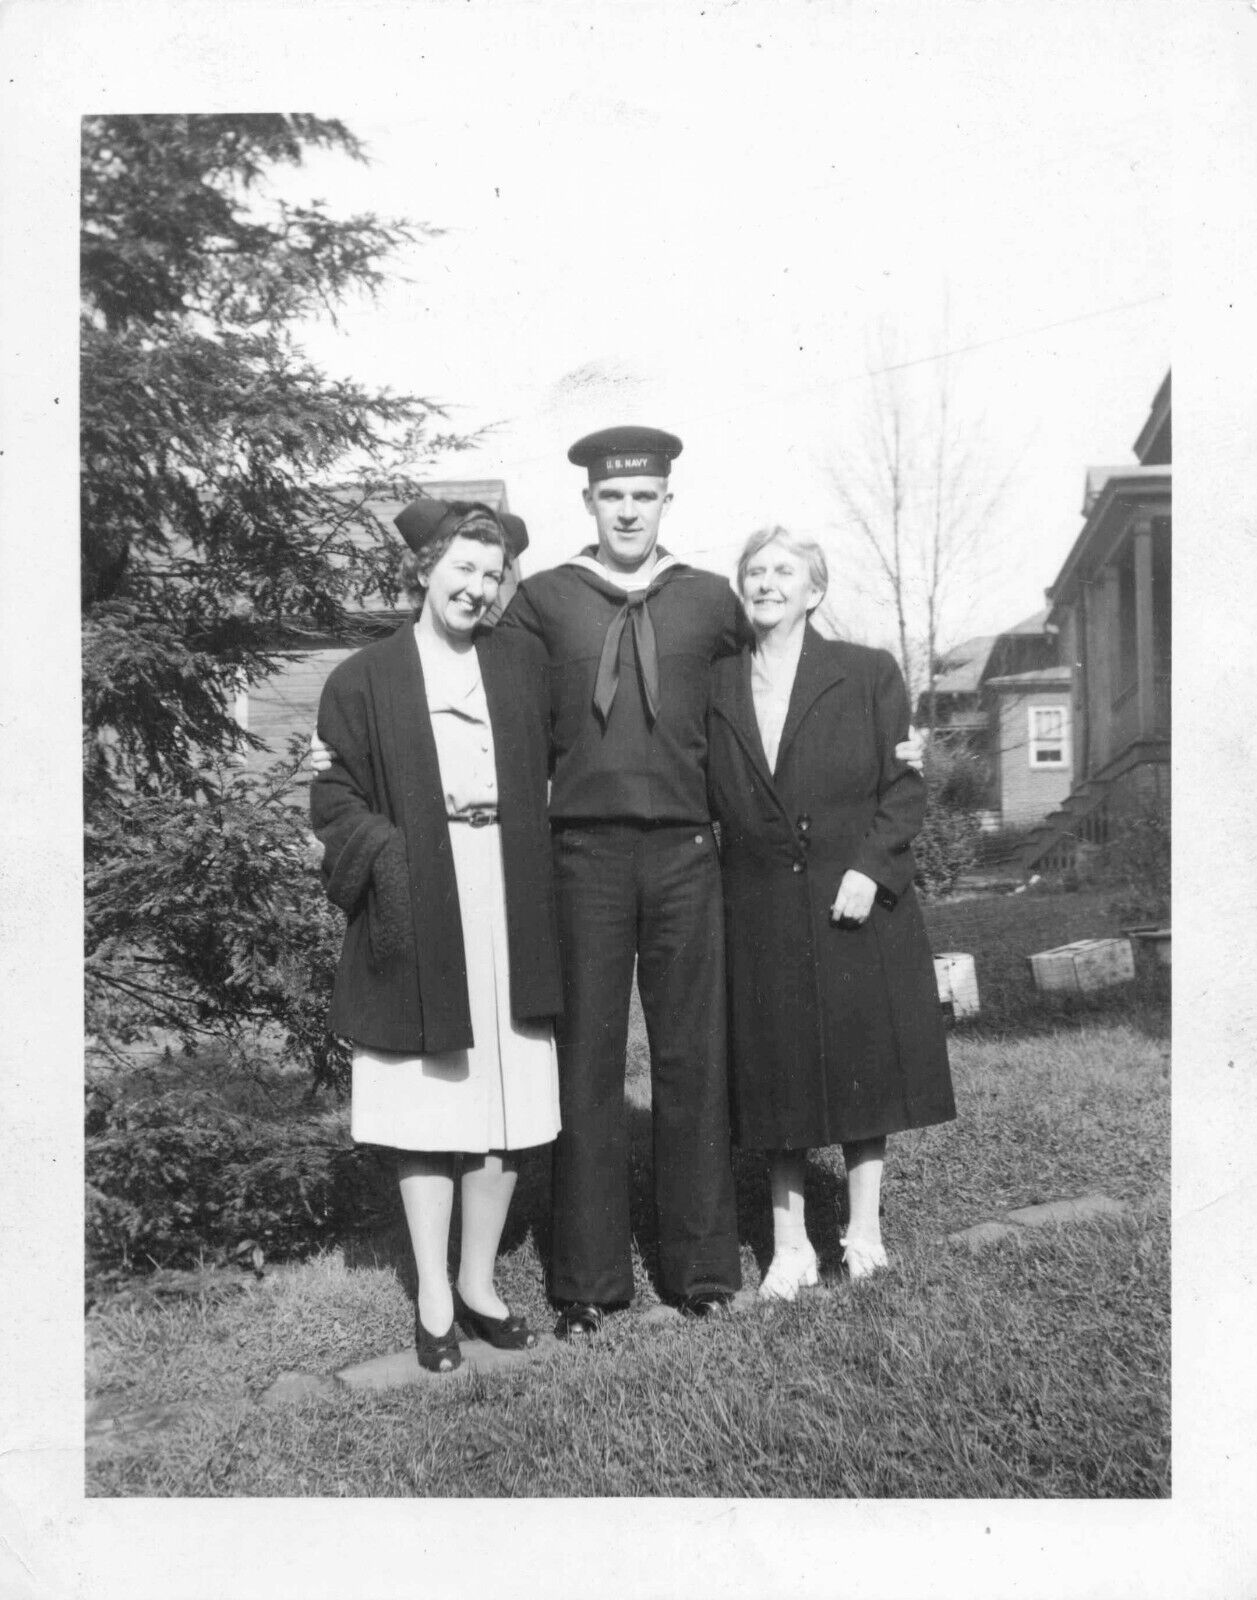 Vintage Photograph Handsome Navy Serviceman on Leave c1940s WWII Mom Grandma P09